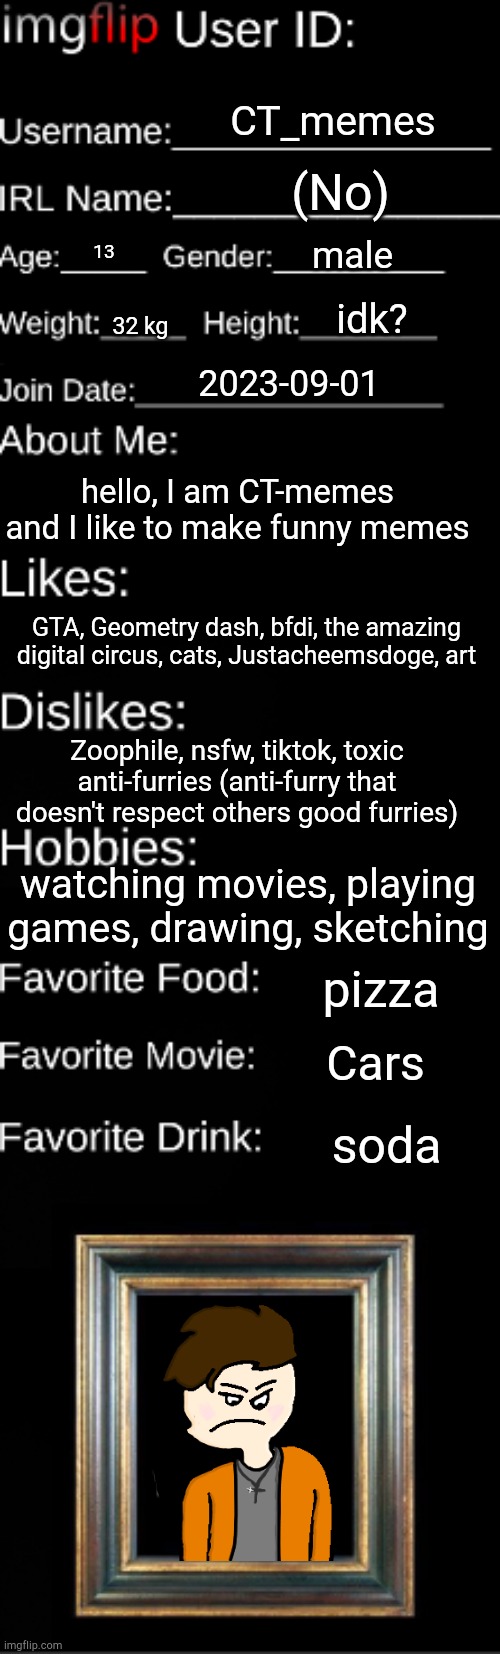 here my id imgflip | CT_memes; (No); male; 13; idk? 32 kg; 2023-09-01; hello, I am CT-memes and I like to make funny memes; GTA, Geometry dash, bfdi, the amazing digital circus, cats, Justacheemsdoge, art; Zoophile, nsfw, tiktok, toxic anti-furries (anti-furry that doesn't respect others good furries); watching movies, playing games, drawing, sketching; pizza; Cars; soda | image tagged in imgflip user id | made w/ Imgflip meme maker